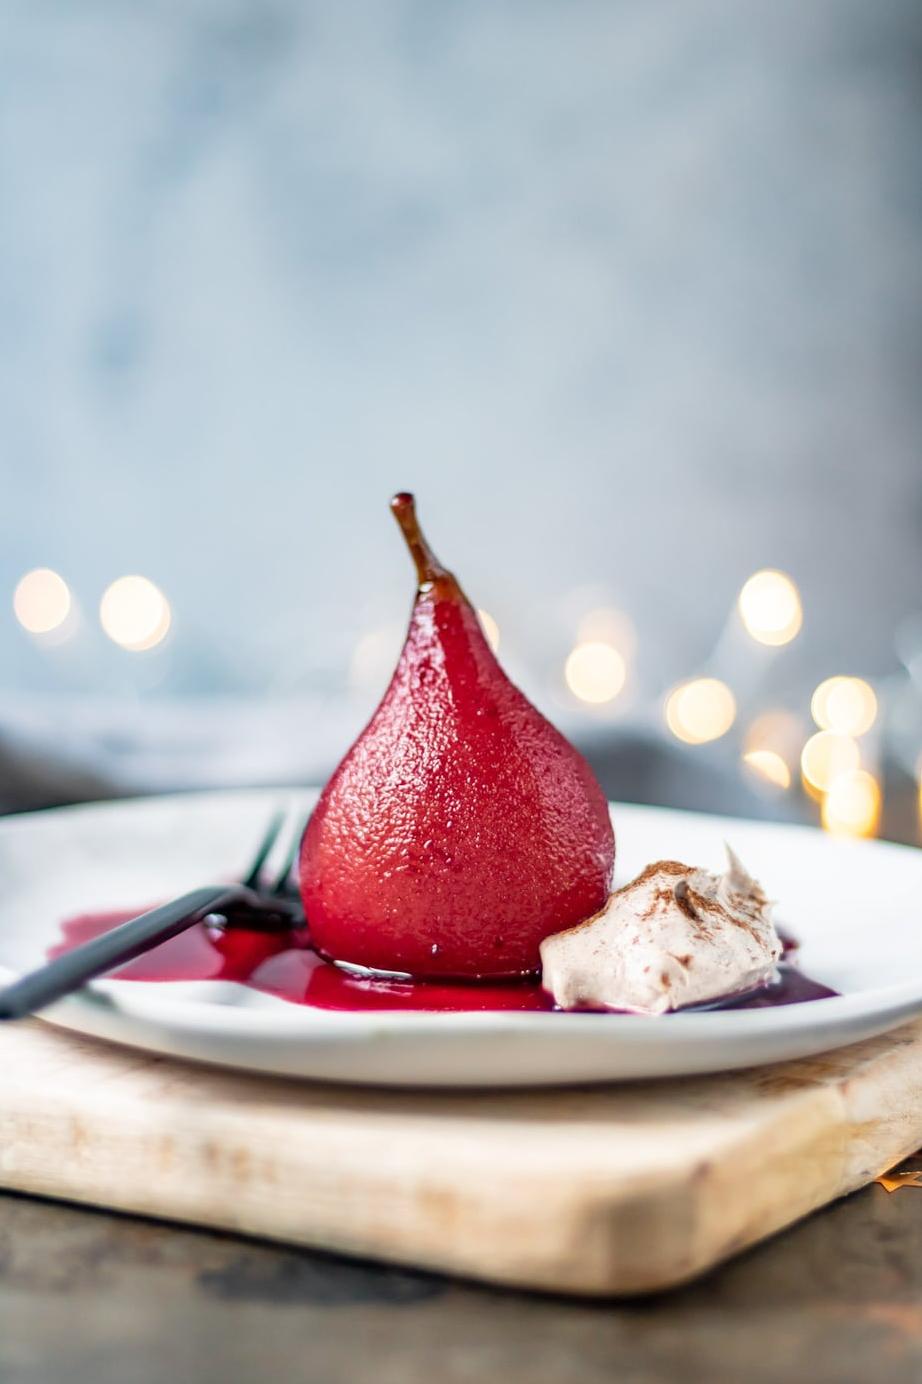  Melt-in-Your-Mouth Goodness: Poached Pears